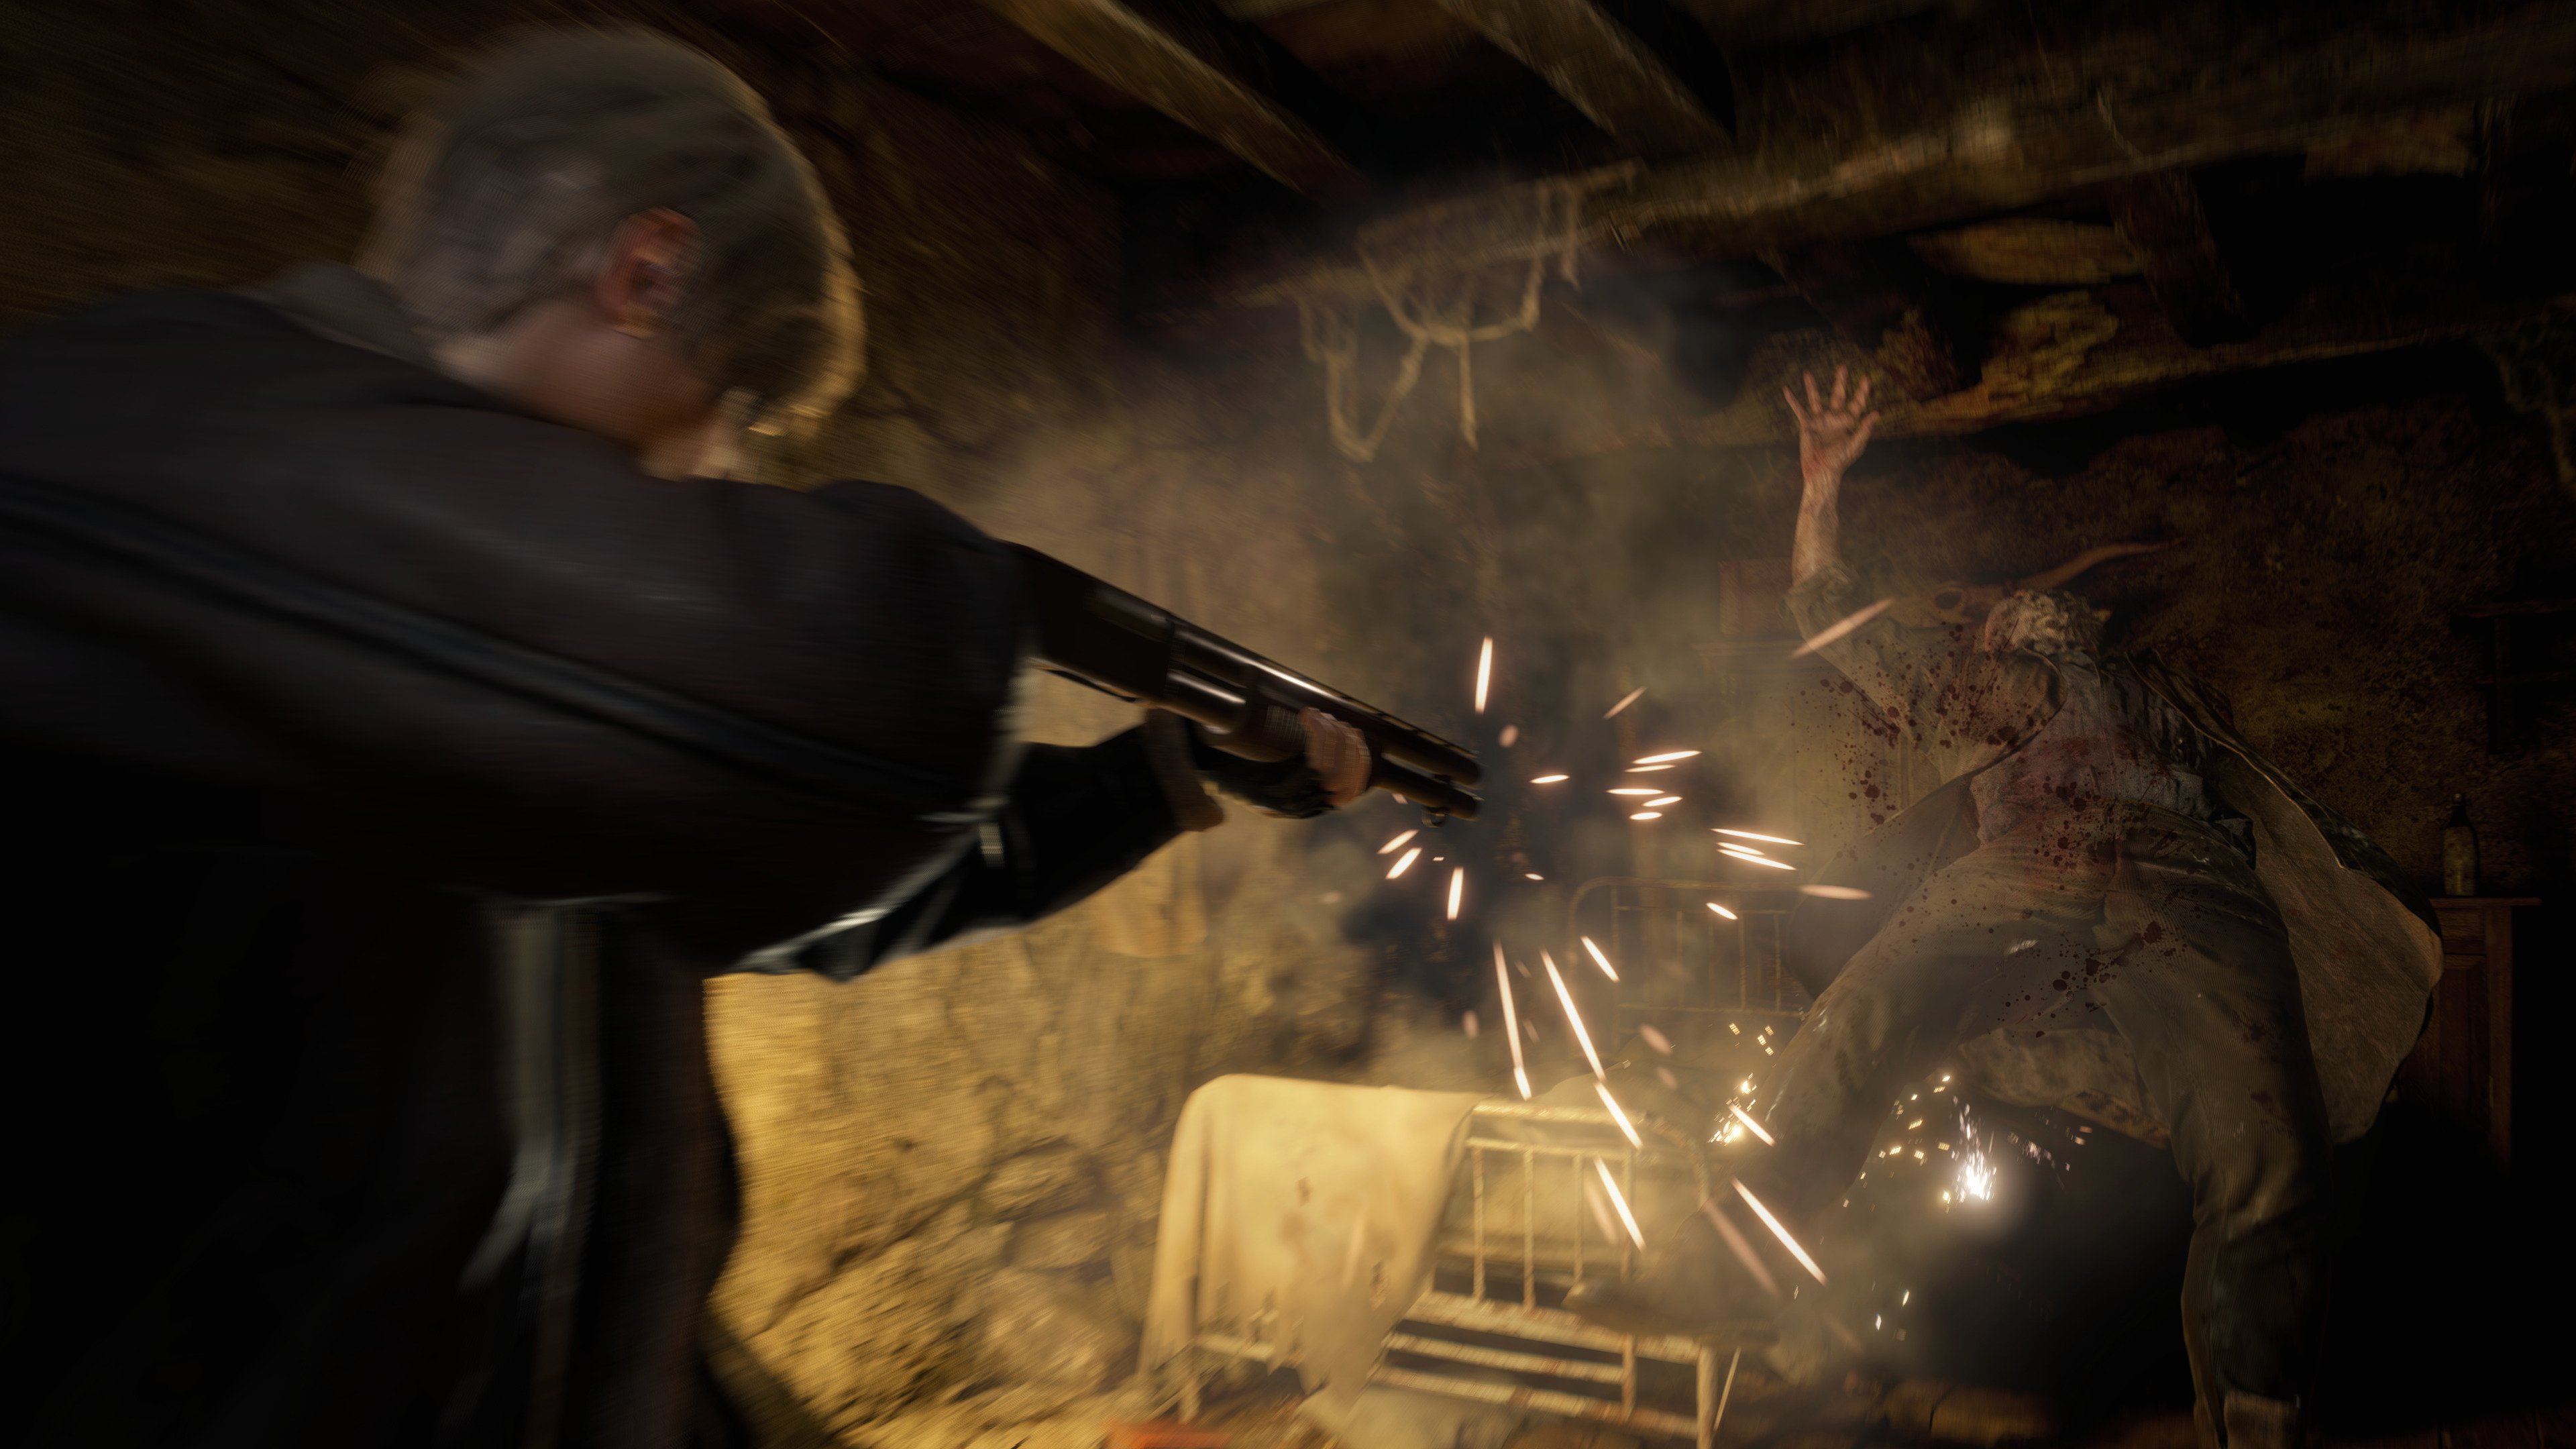 Resident Evil 4 remake becomes franchise's biggest launch on Steam, peaking  at 140k concurrent players